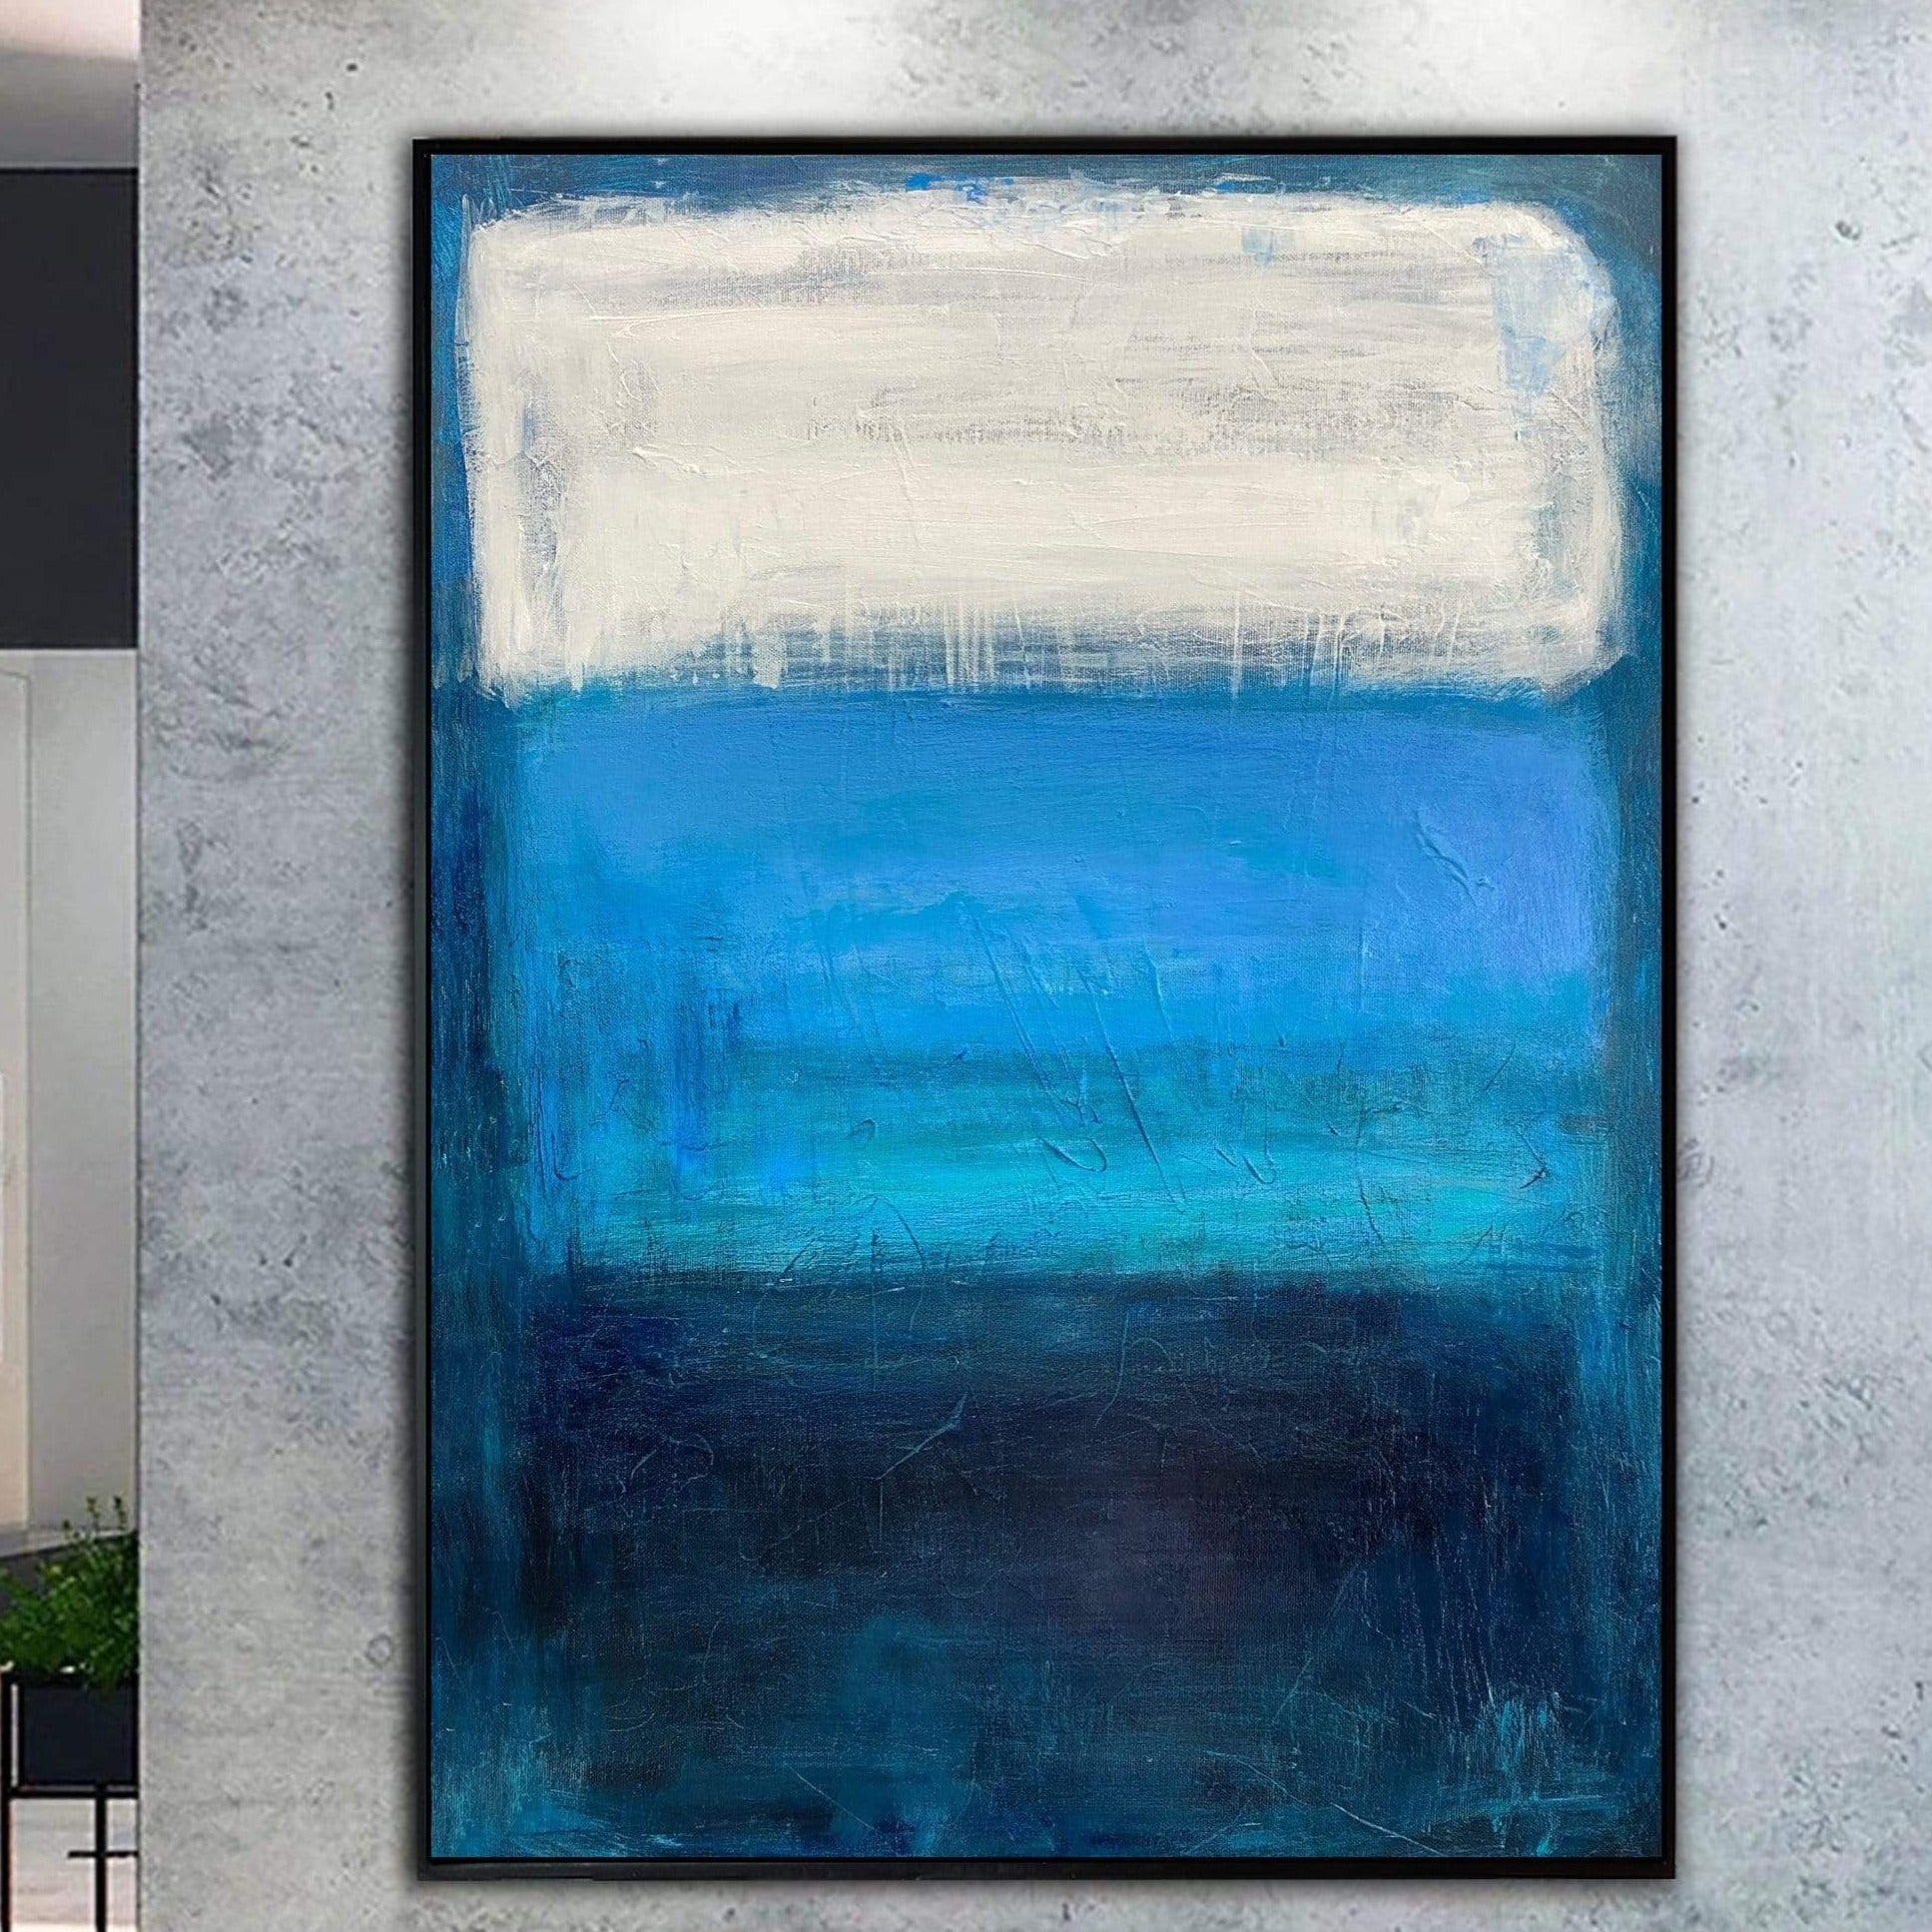 MEMORY OF THE SEA from $310